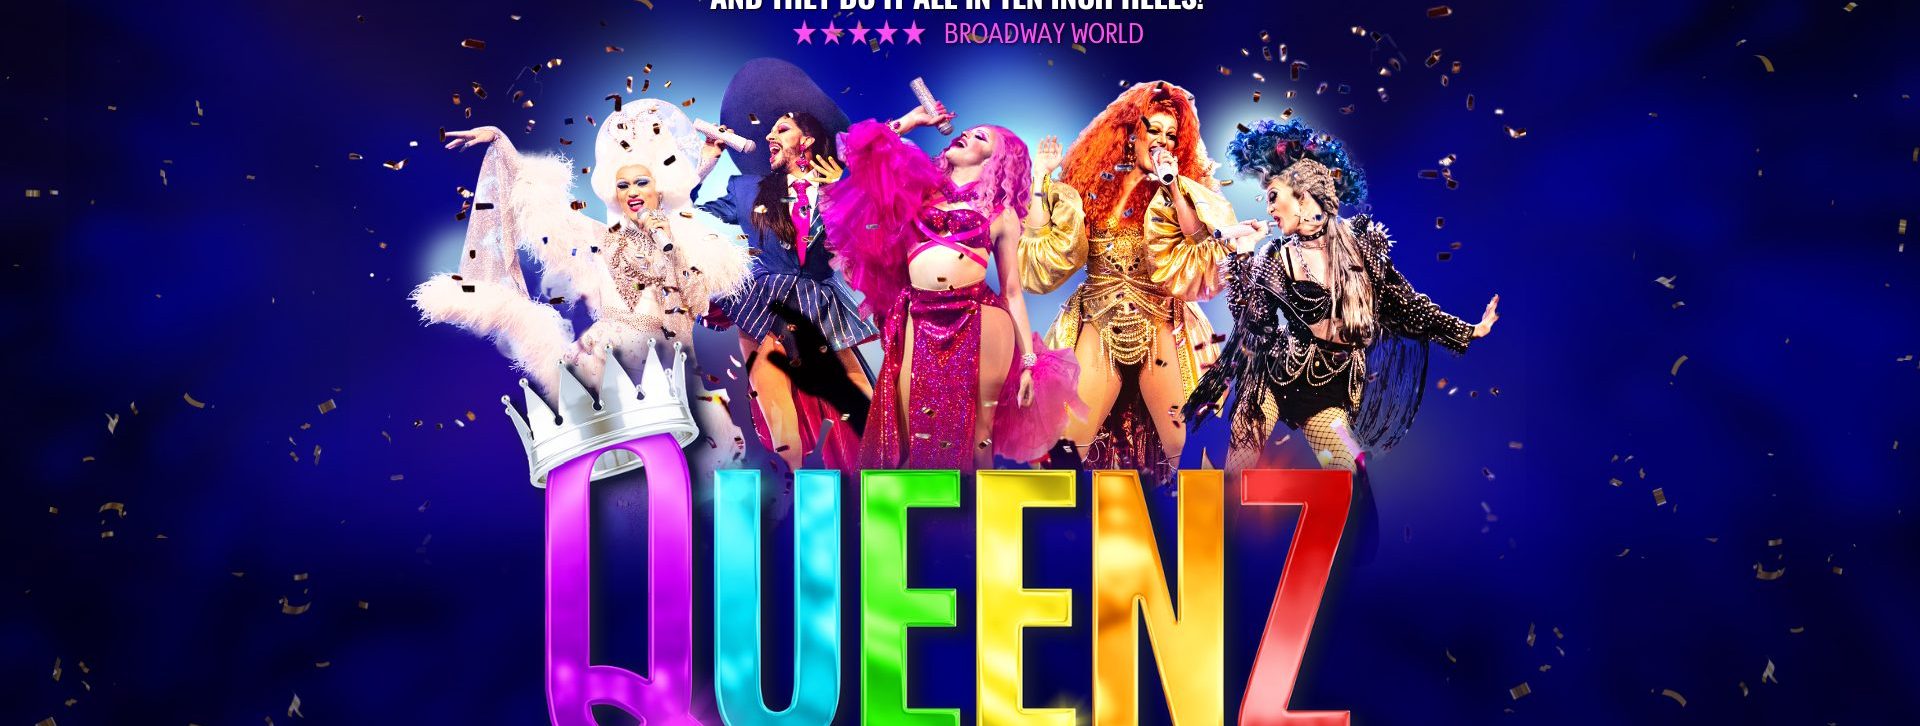 Queenz: The Show With Balls